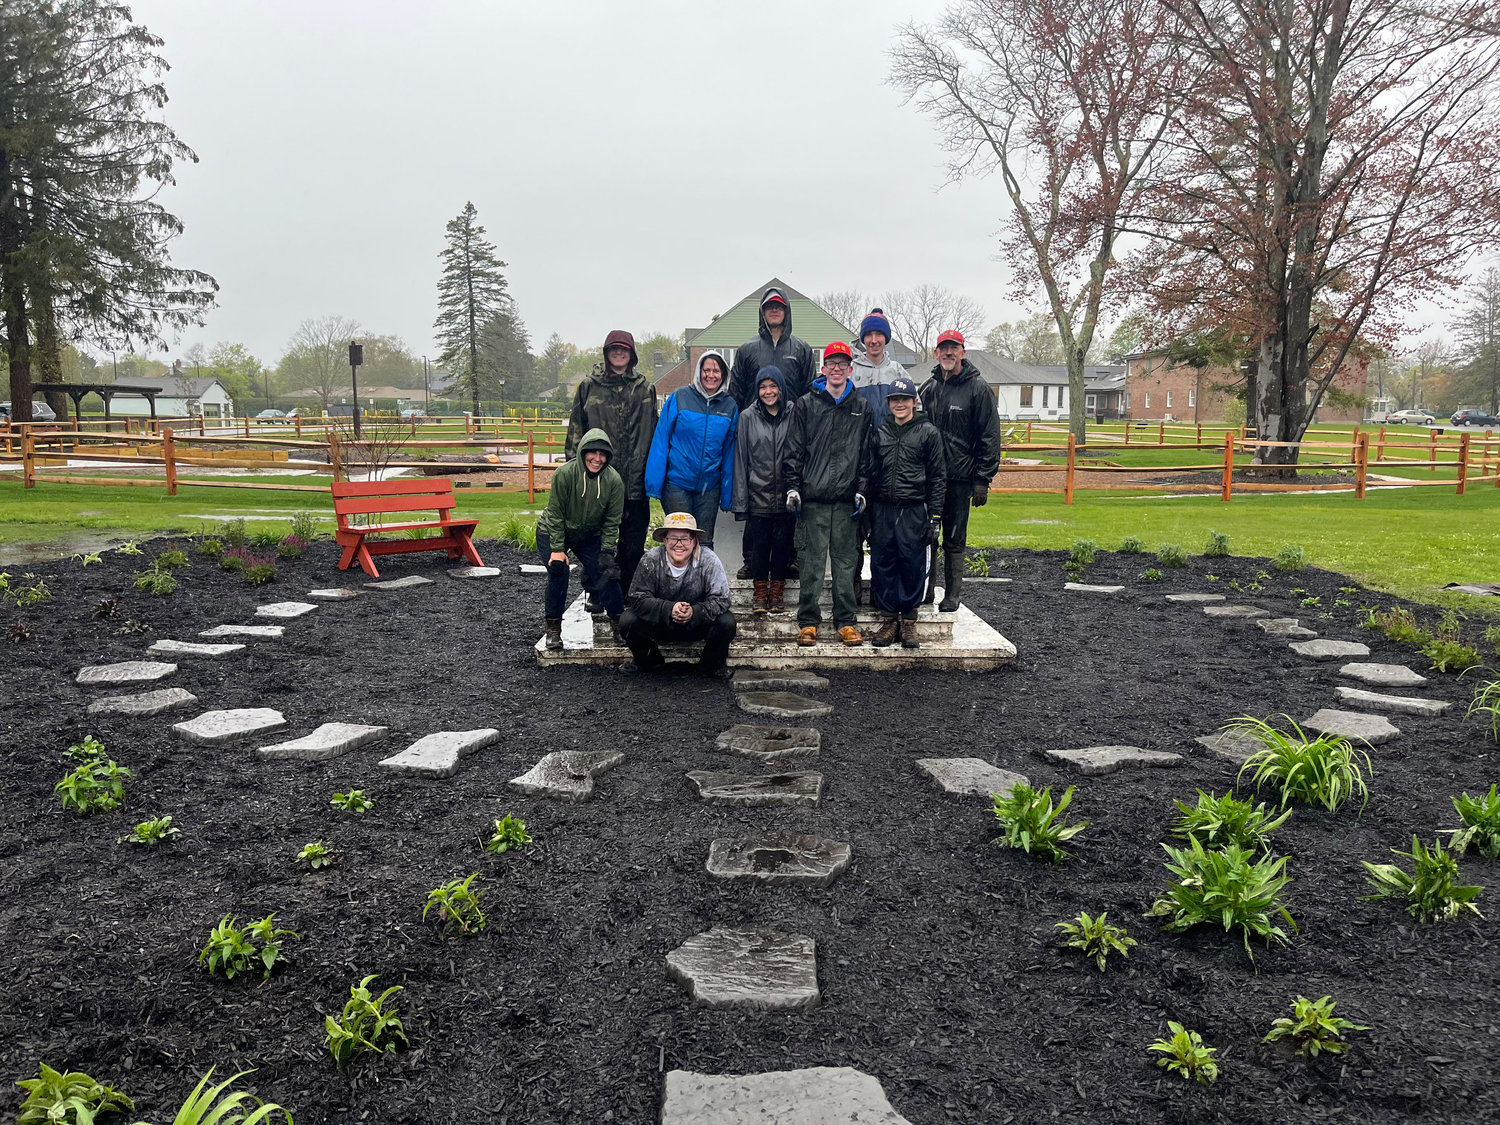 Nasca and volunteers take a break from the construction of the butterfly garden.